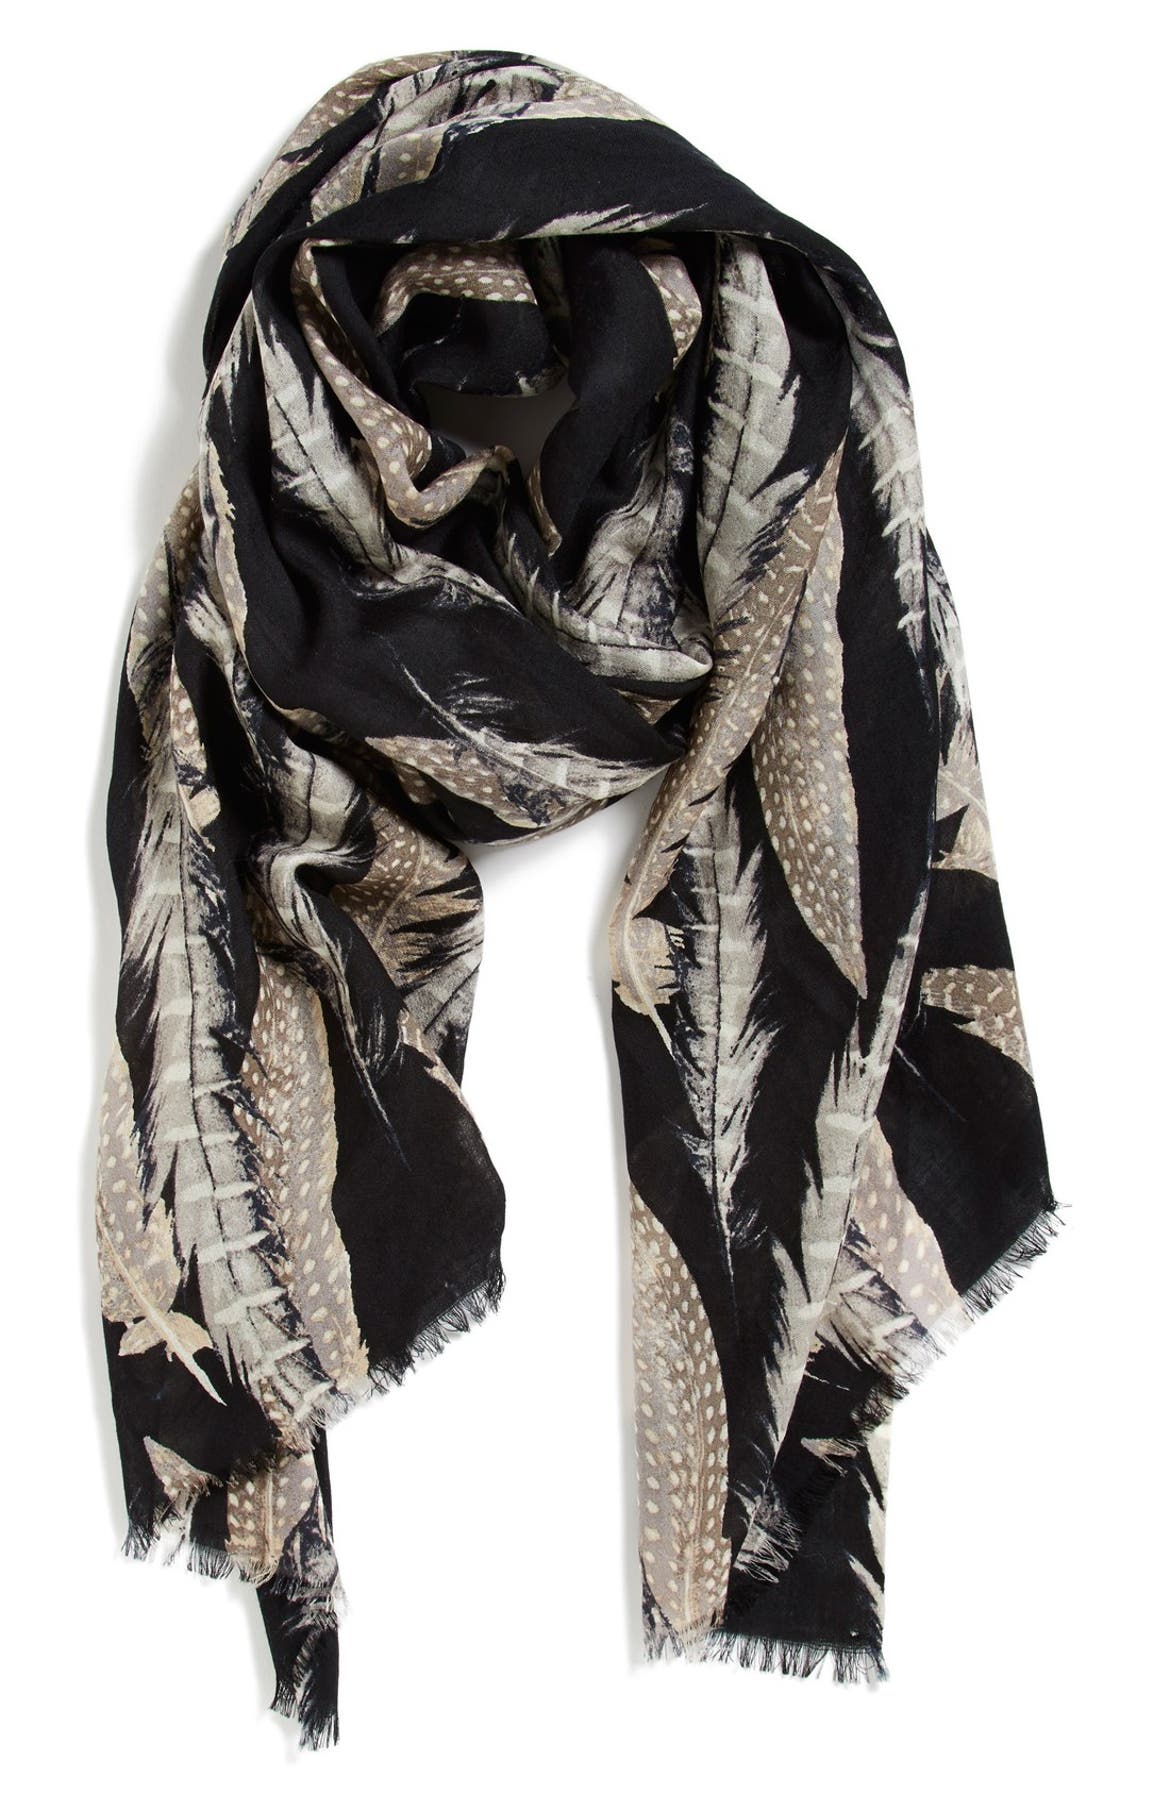 Nordstrom 'Quill Challis' Feather Print Wool Scarf | Nordstrom